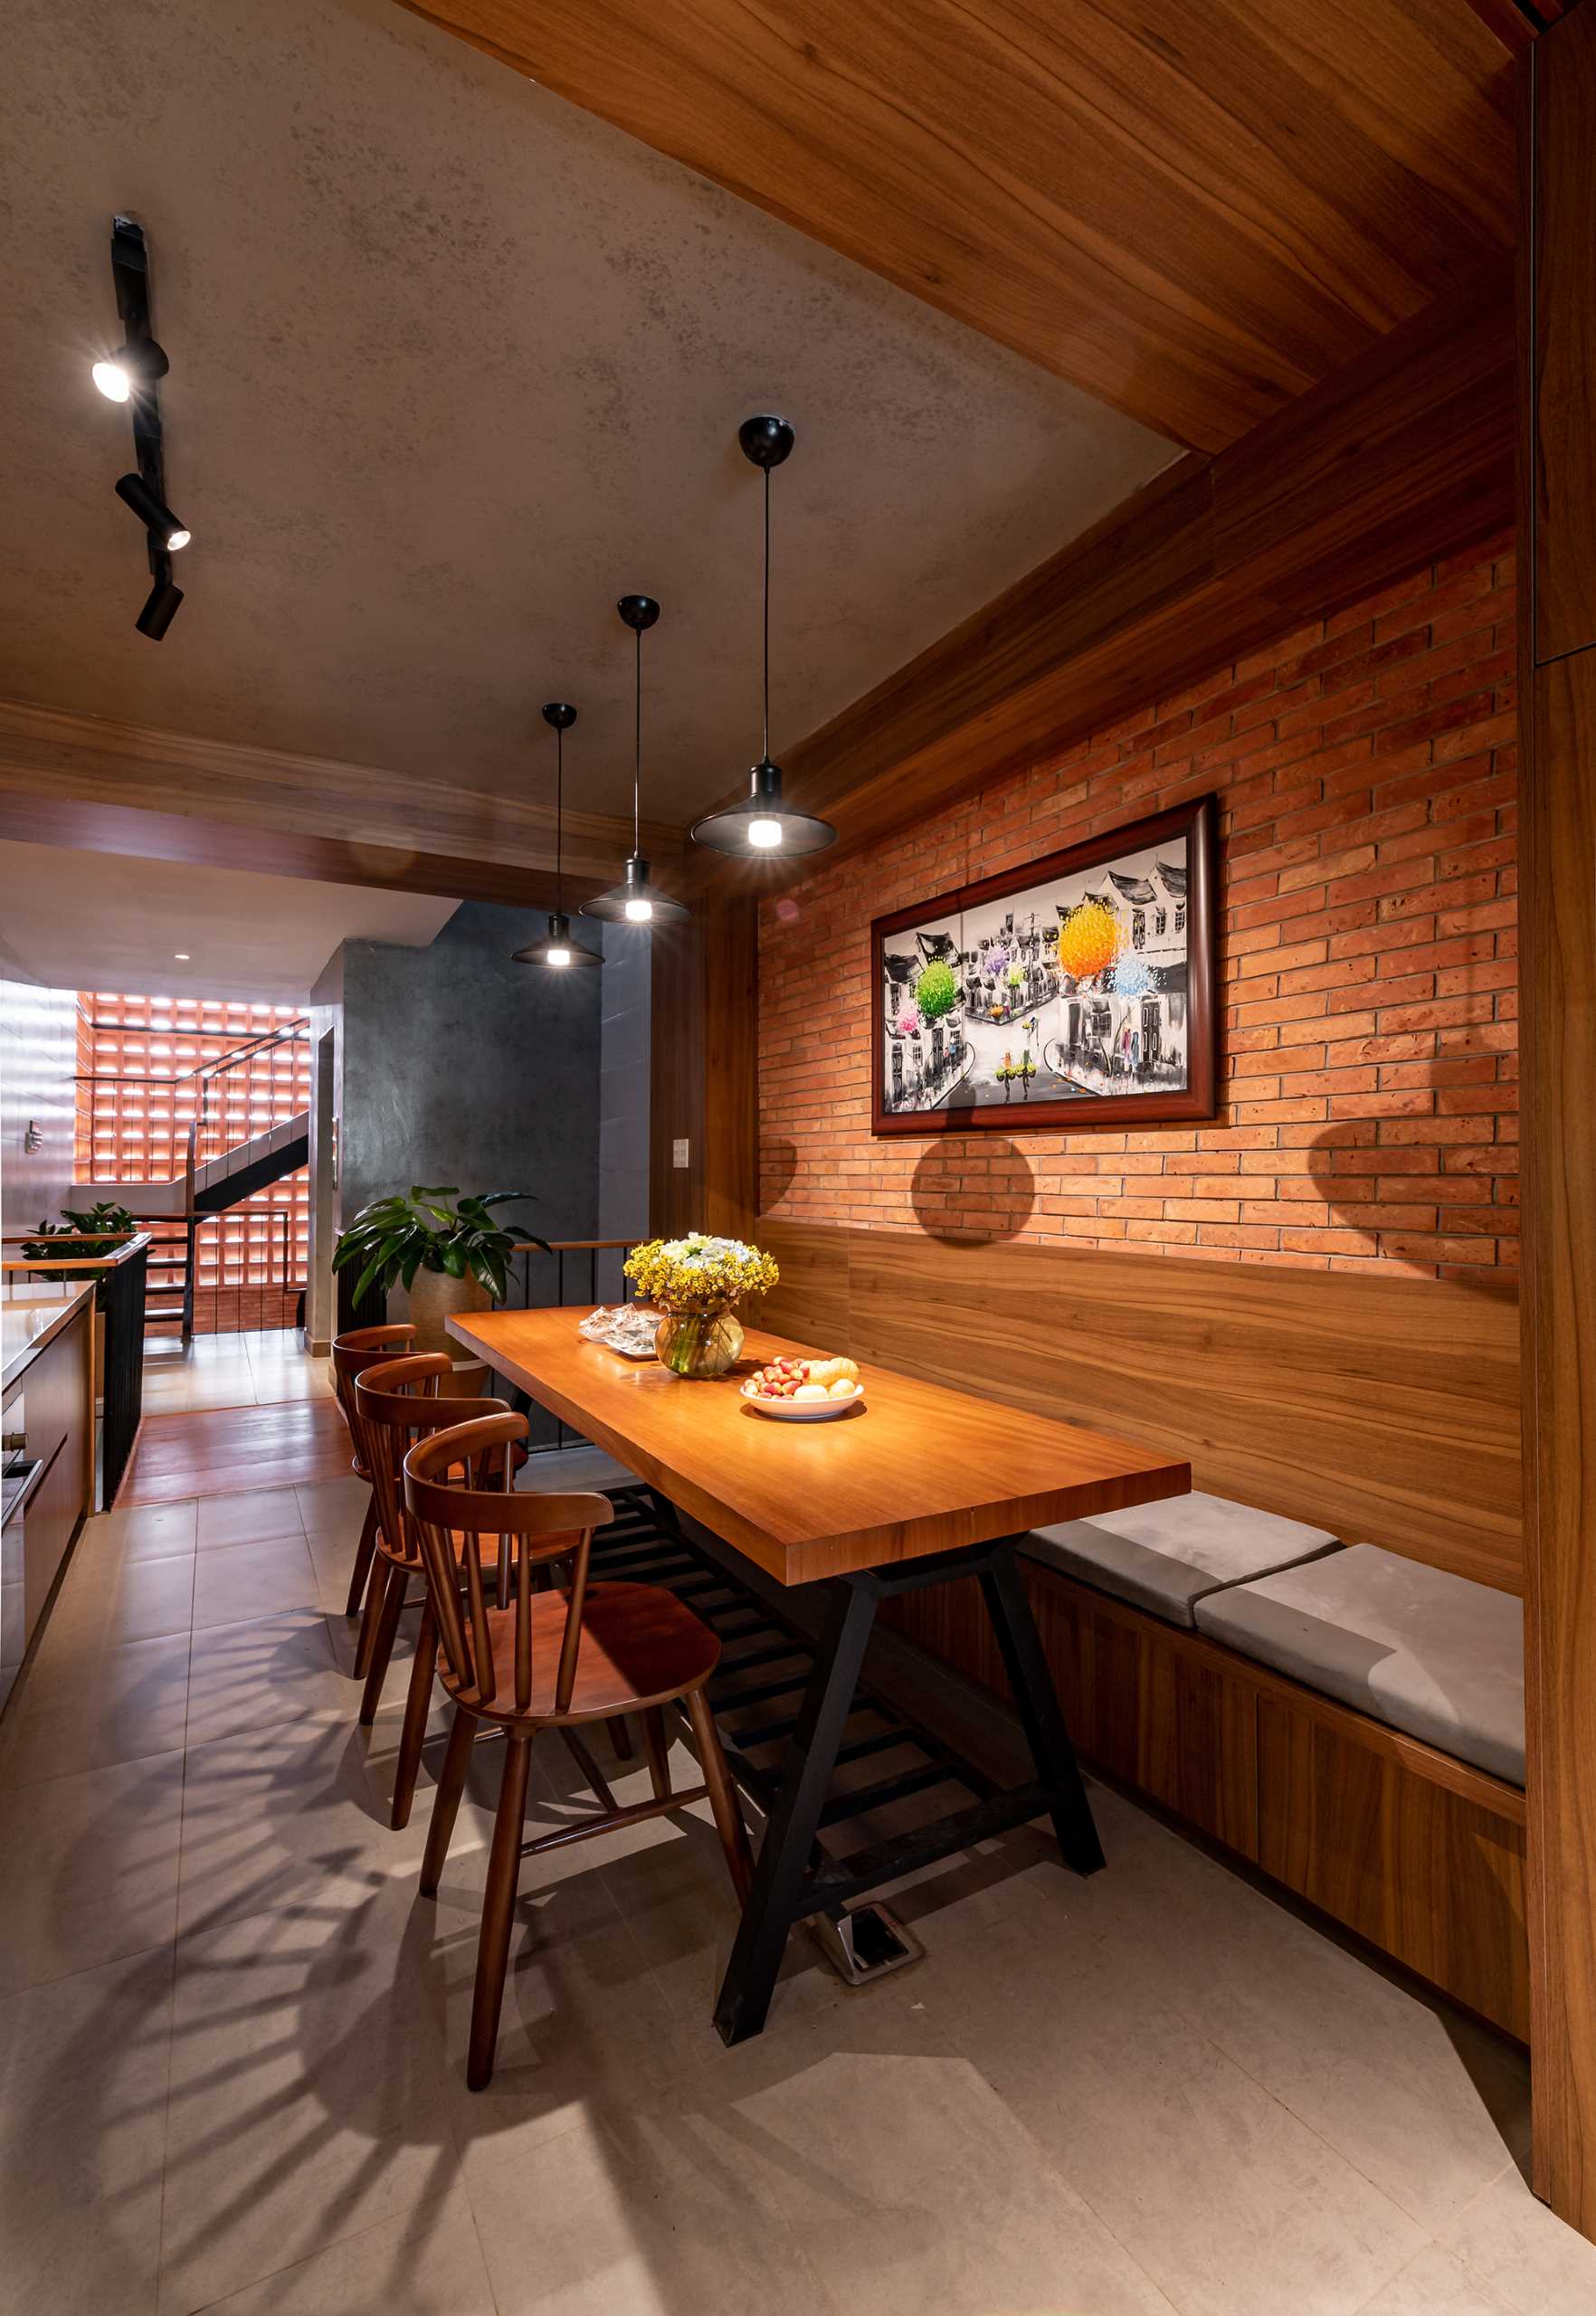 The dining area includes built-in banquette seating, while three pendant lights highlight the wood table.